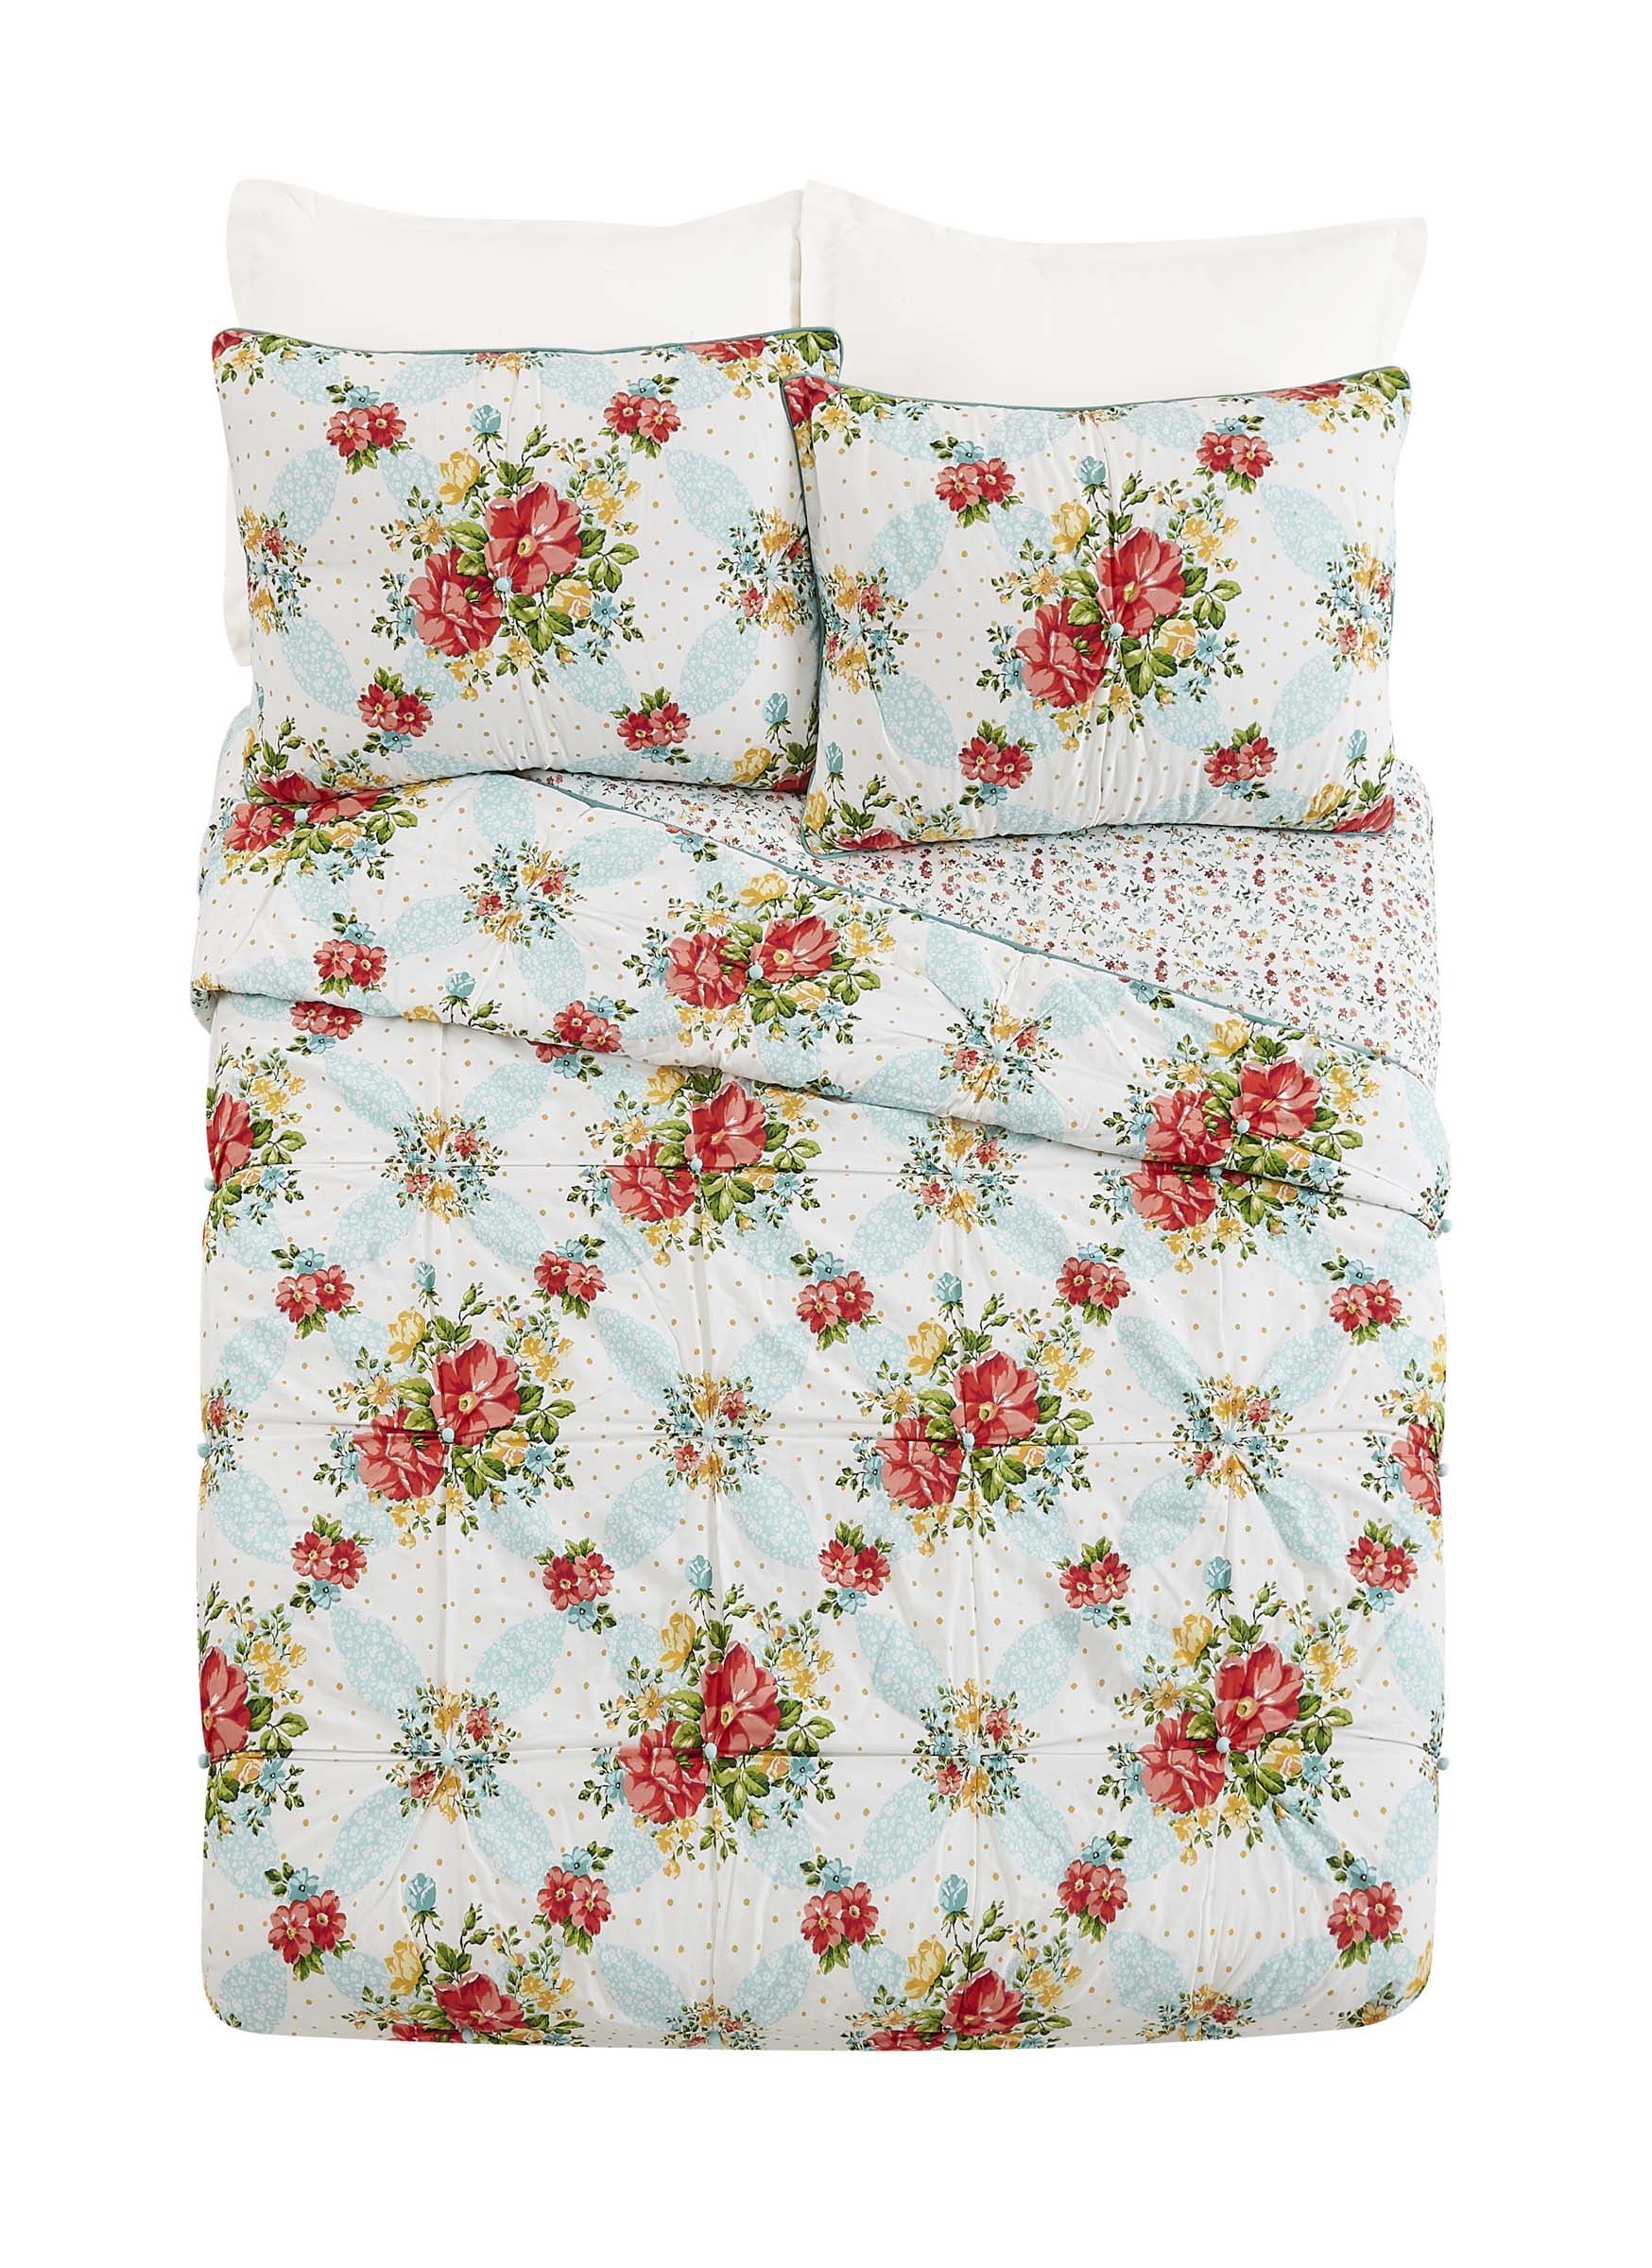 BEAUTIFUL XXL COUNTRY VINTAGE WHITE PINK RED GREEN BLUE PATCHWORK BEDSPREAD SET 